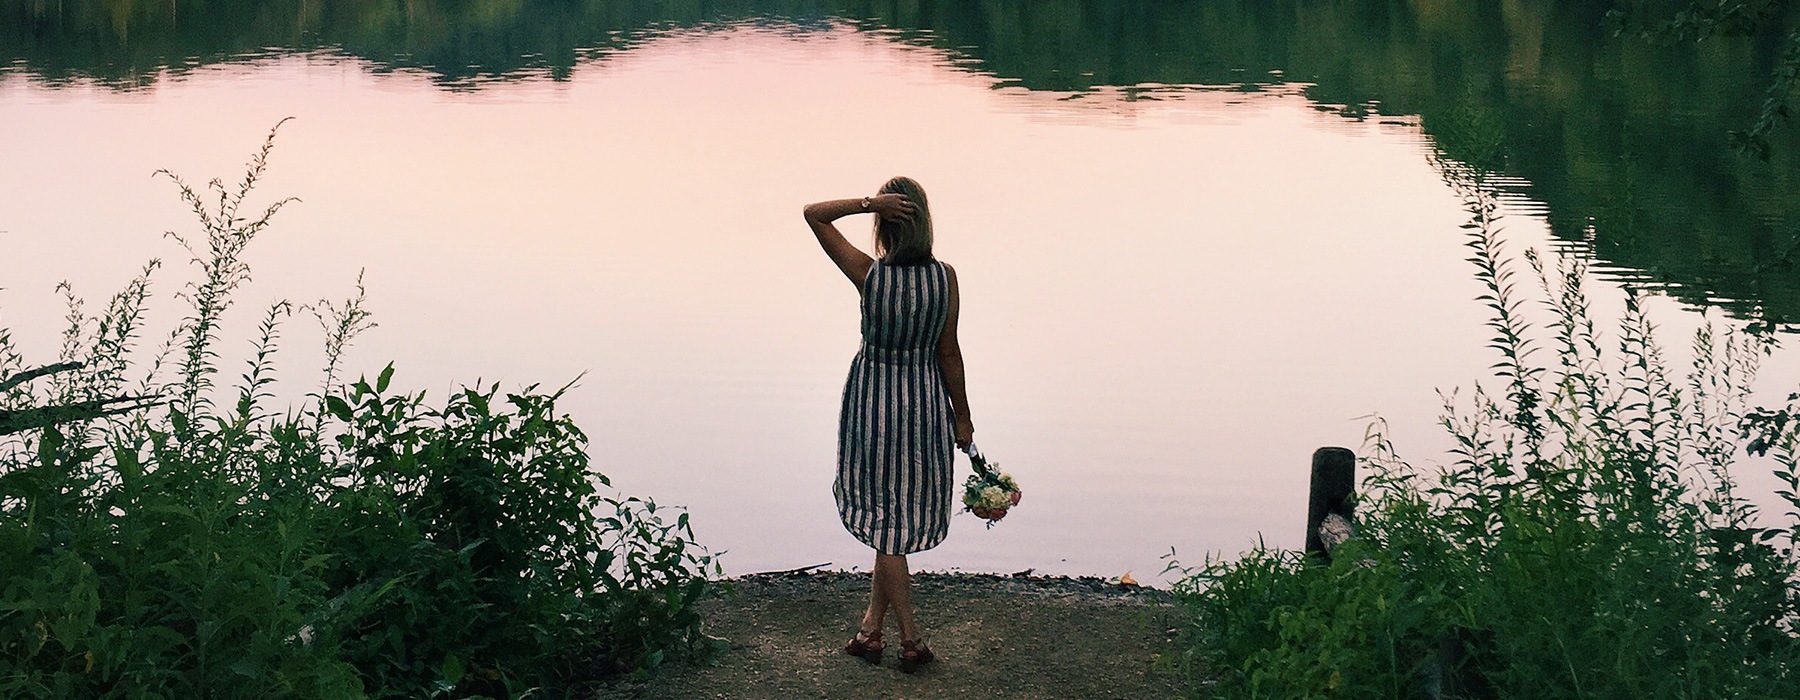 lifestyle image of a woman standing beside a body of water